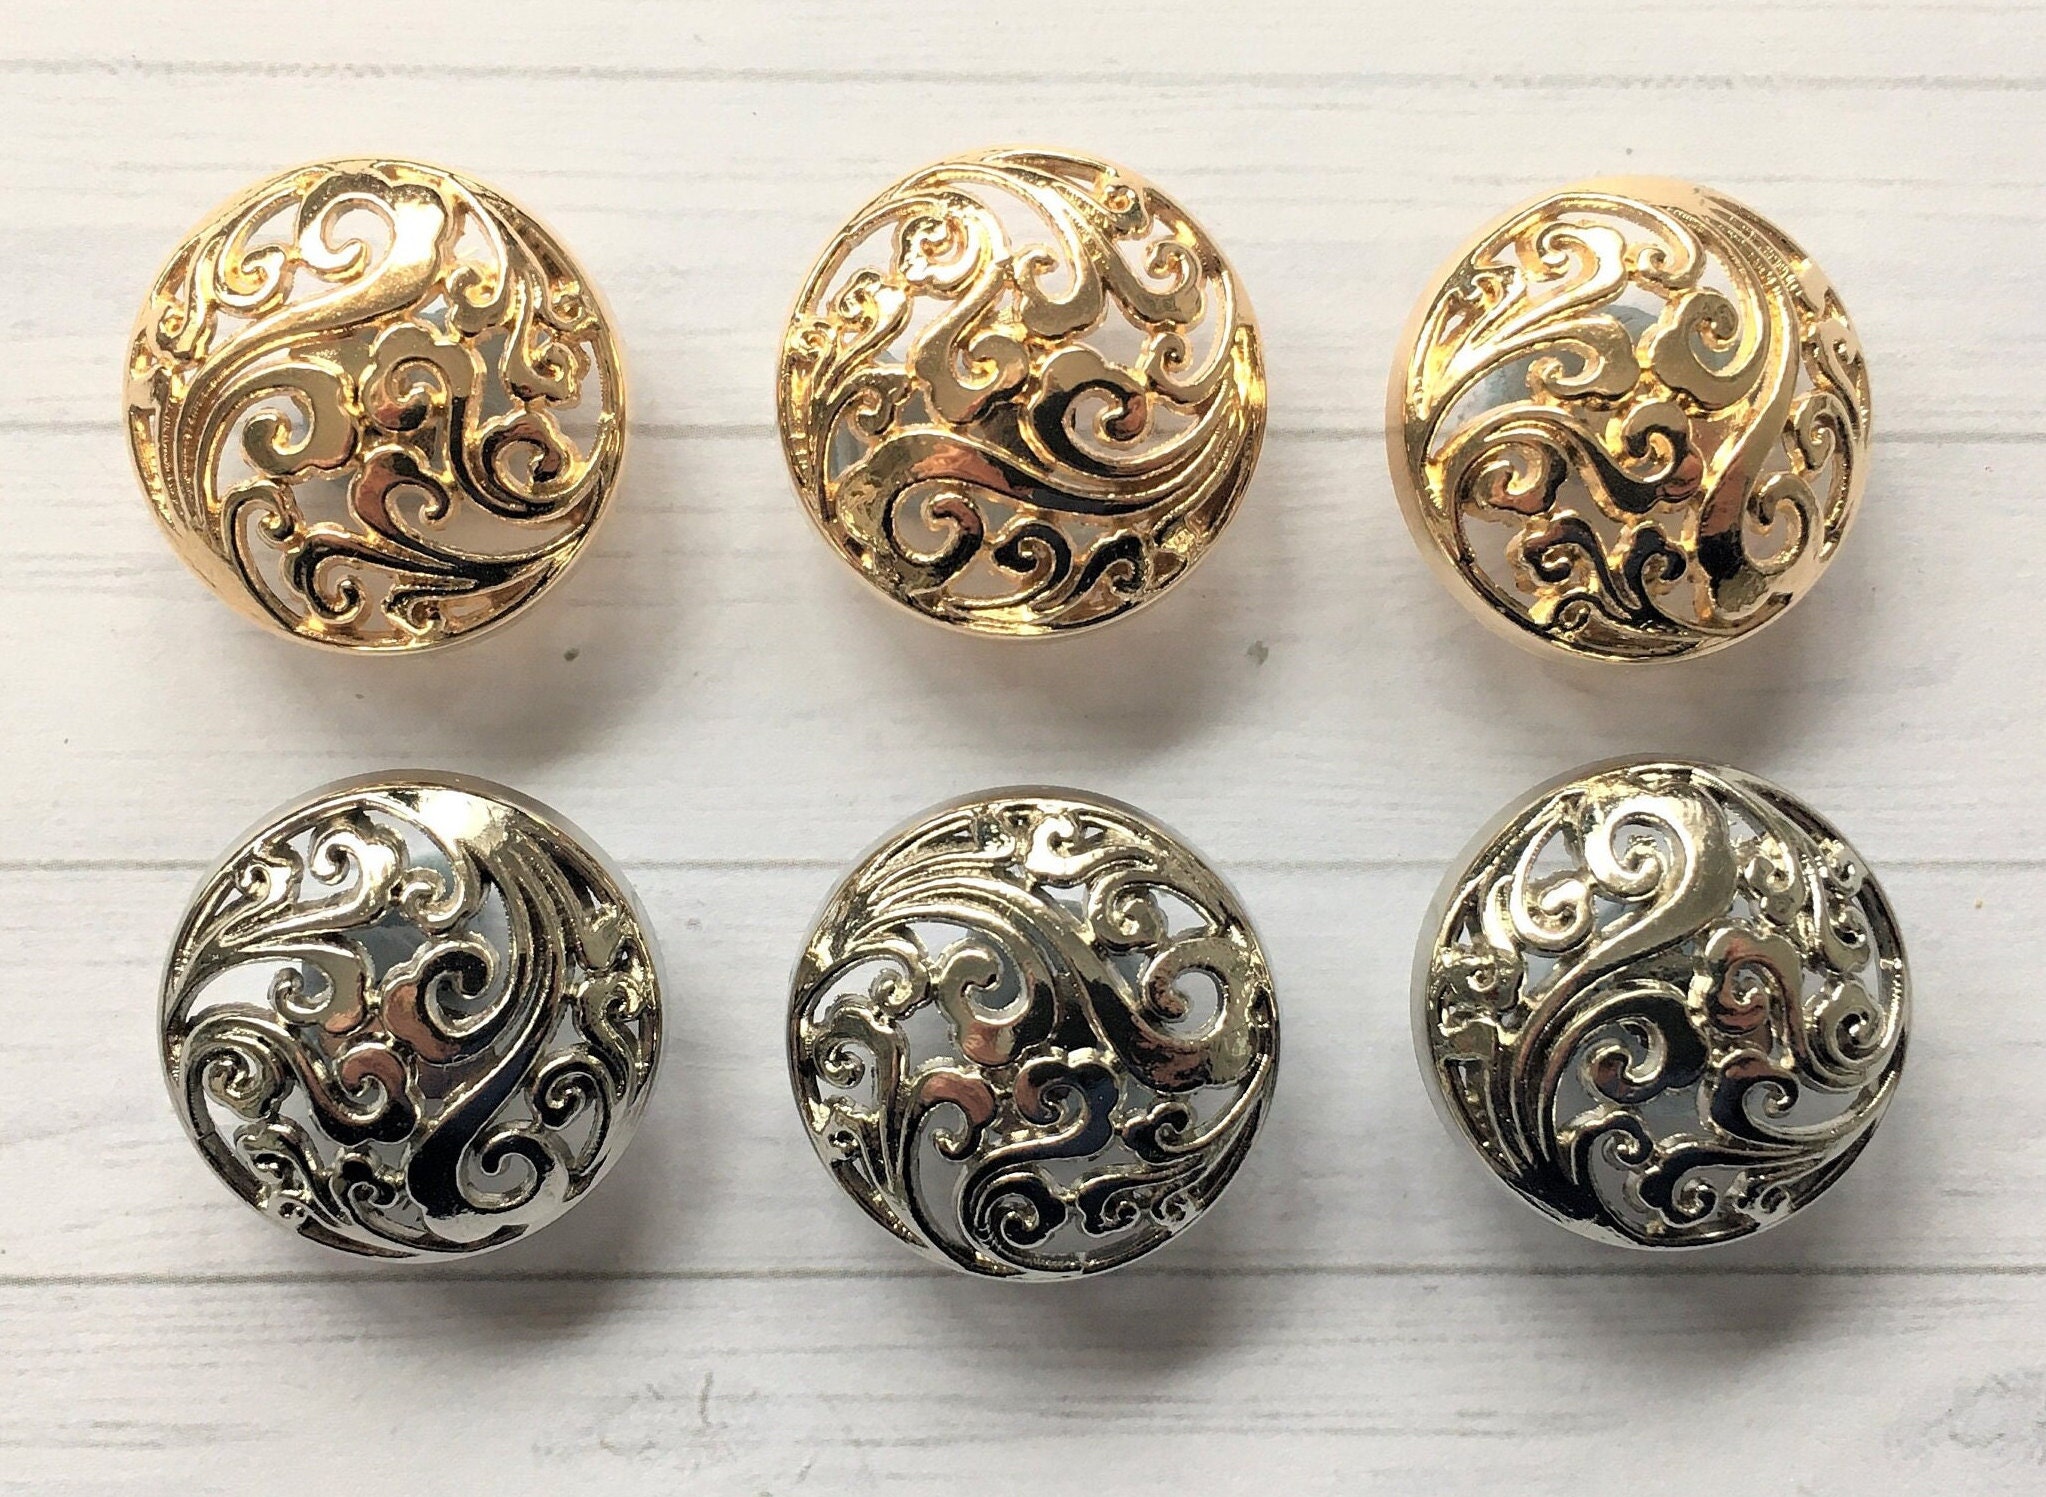 15MM Antique Silver or Bronze Shirt Buttons Flat Front Shank Hollow Metal  24L 5/8 Steampunk Military Retro Clothes Uniform Antique Finish 